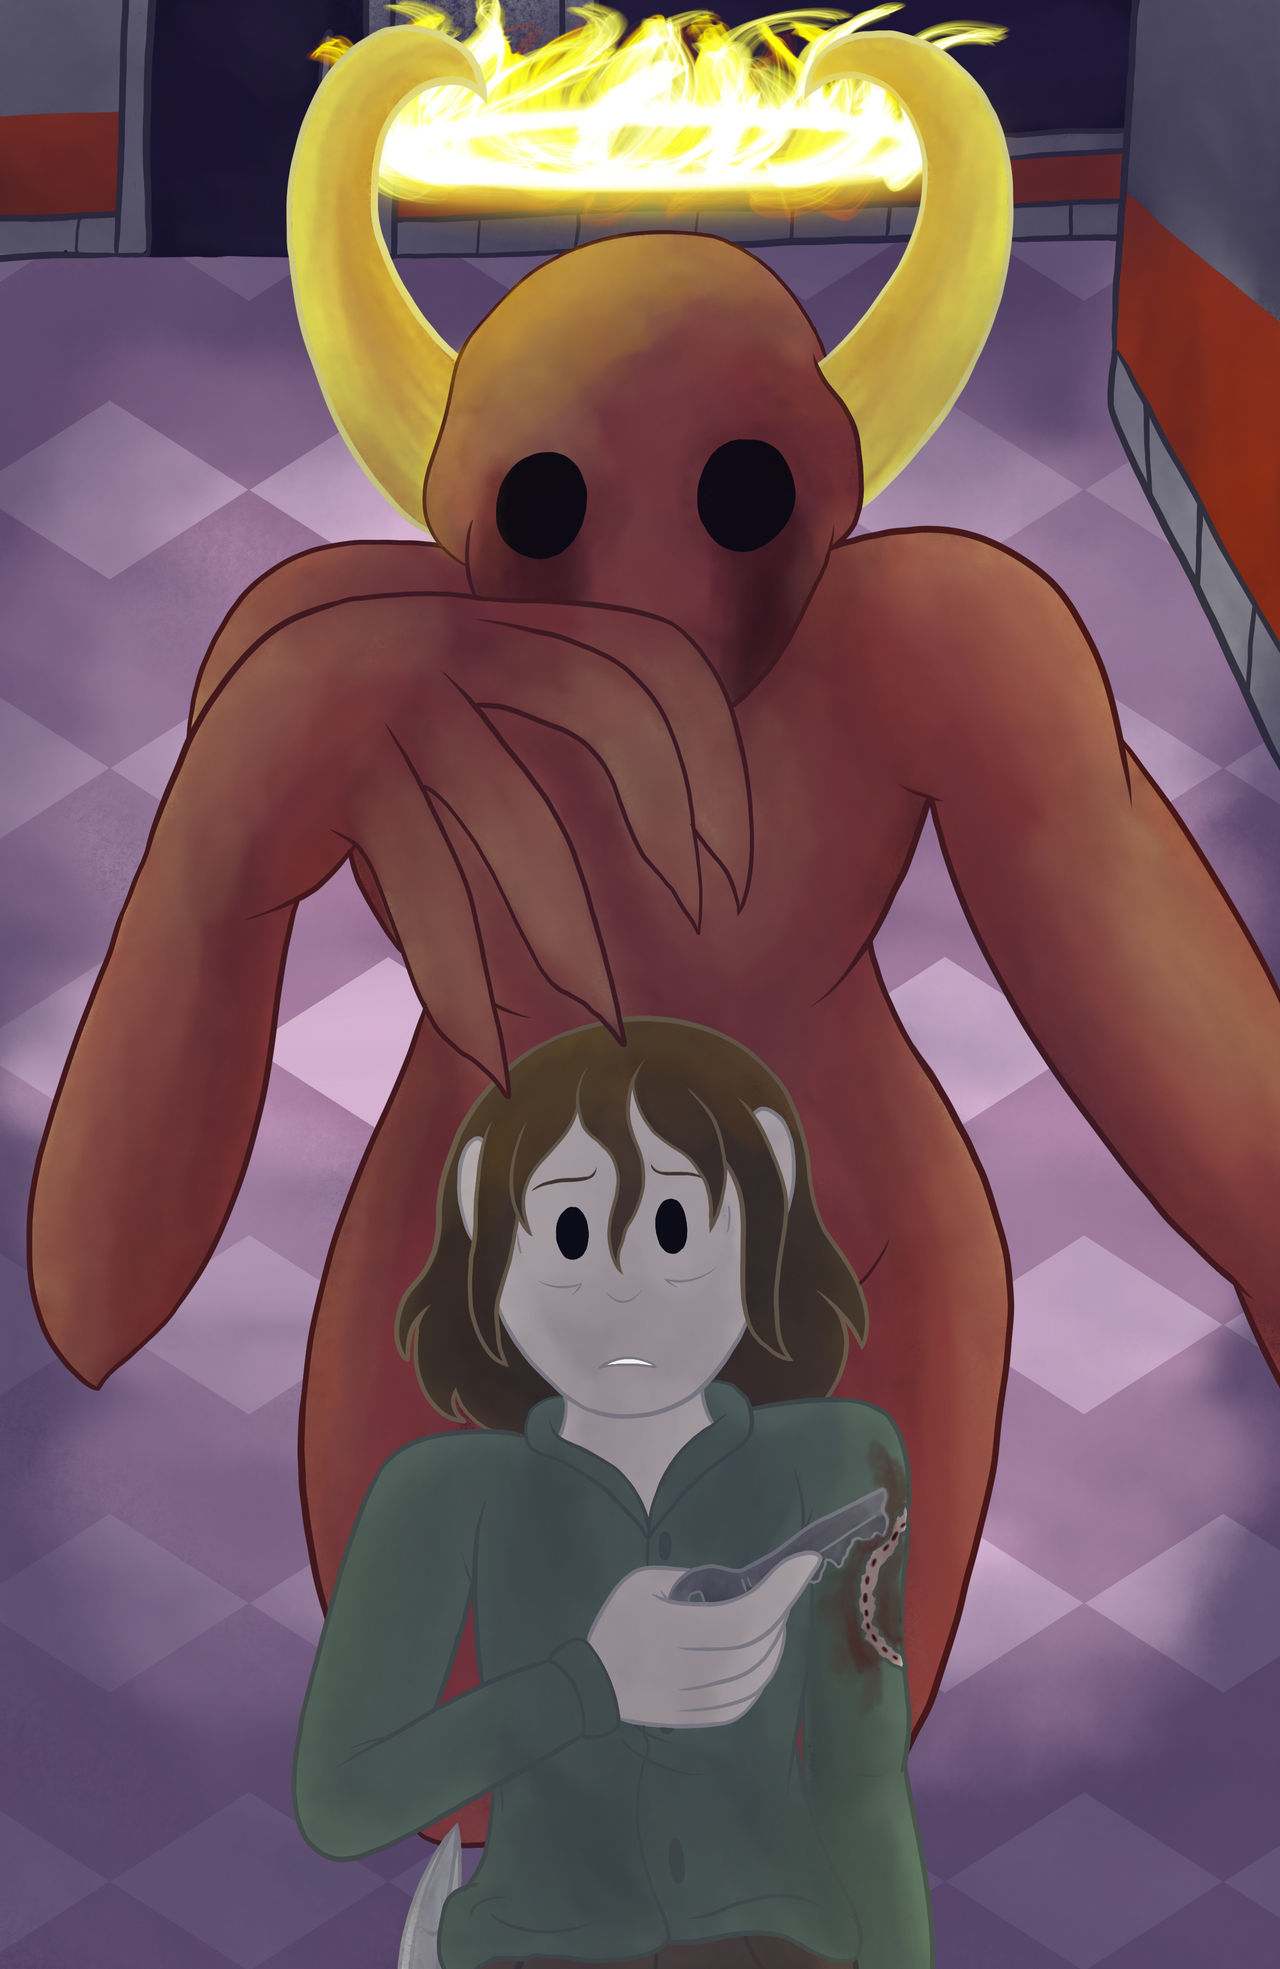 A Jumpscare From Above (2023) by Ch1l1l1zardL3g3ndz on DeviantArt